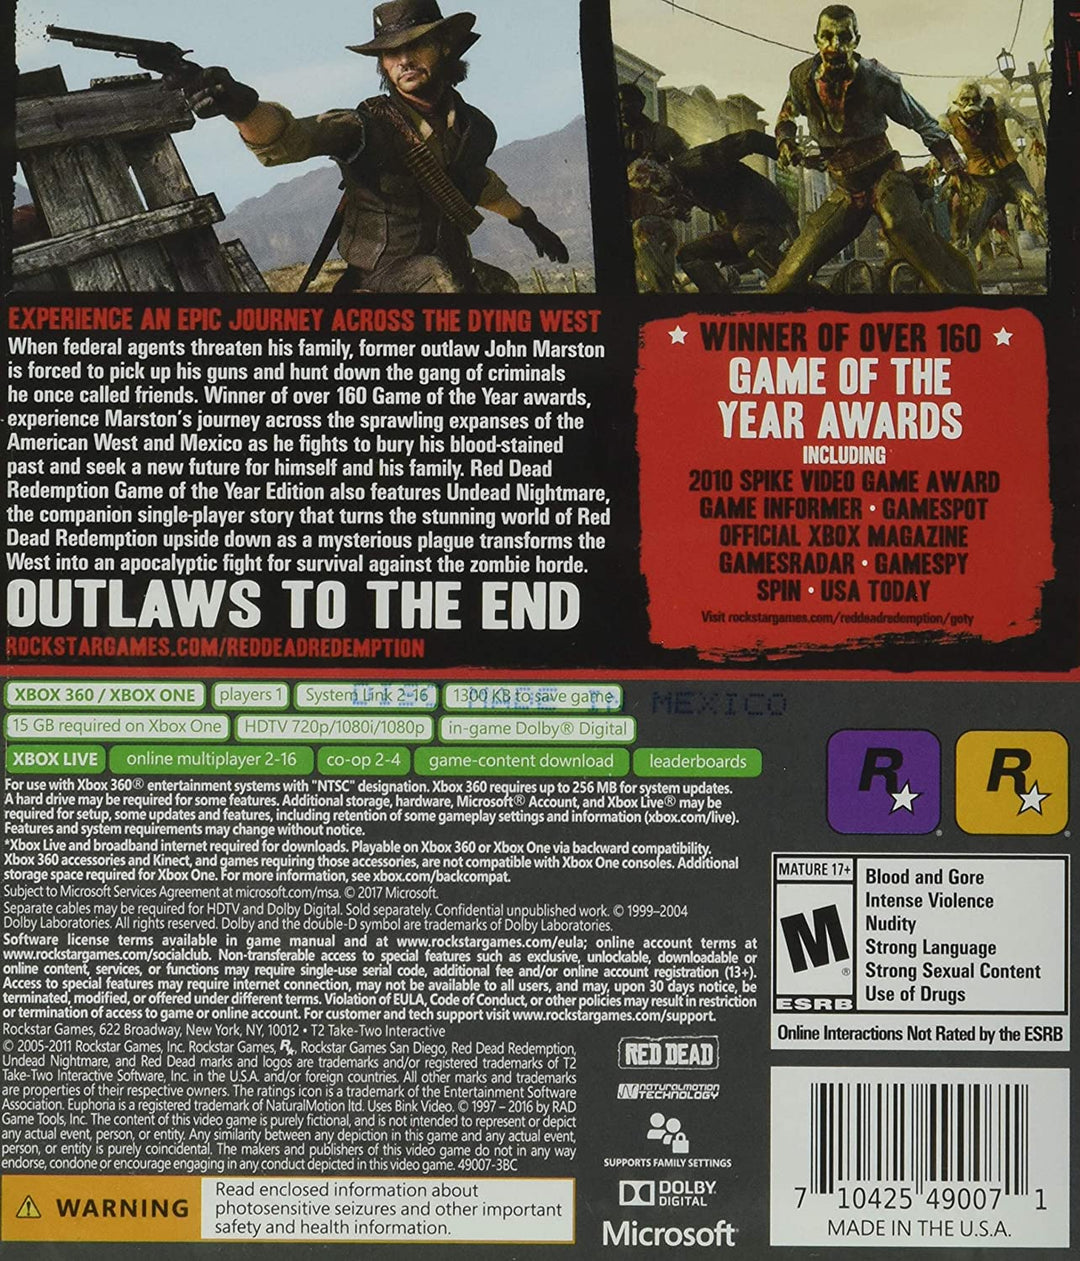 Red Dead Redemption: Game of the Year Edition - Xbox 360 by Rockstar Games